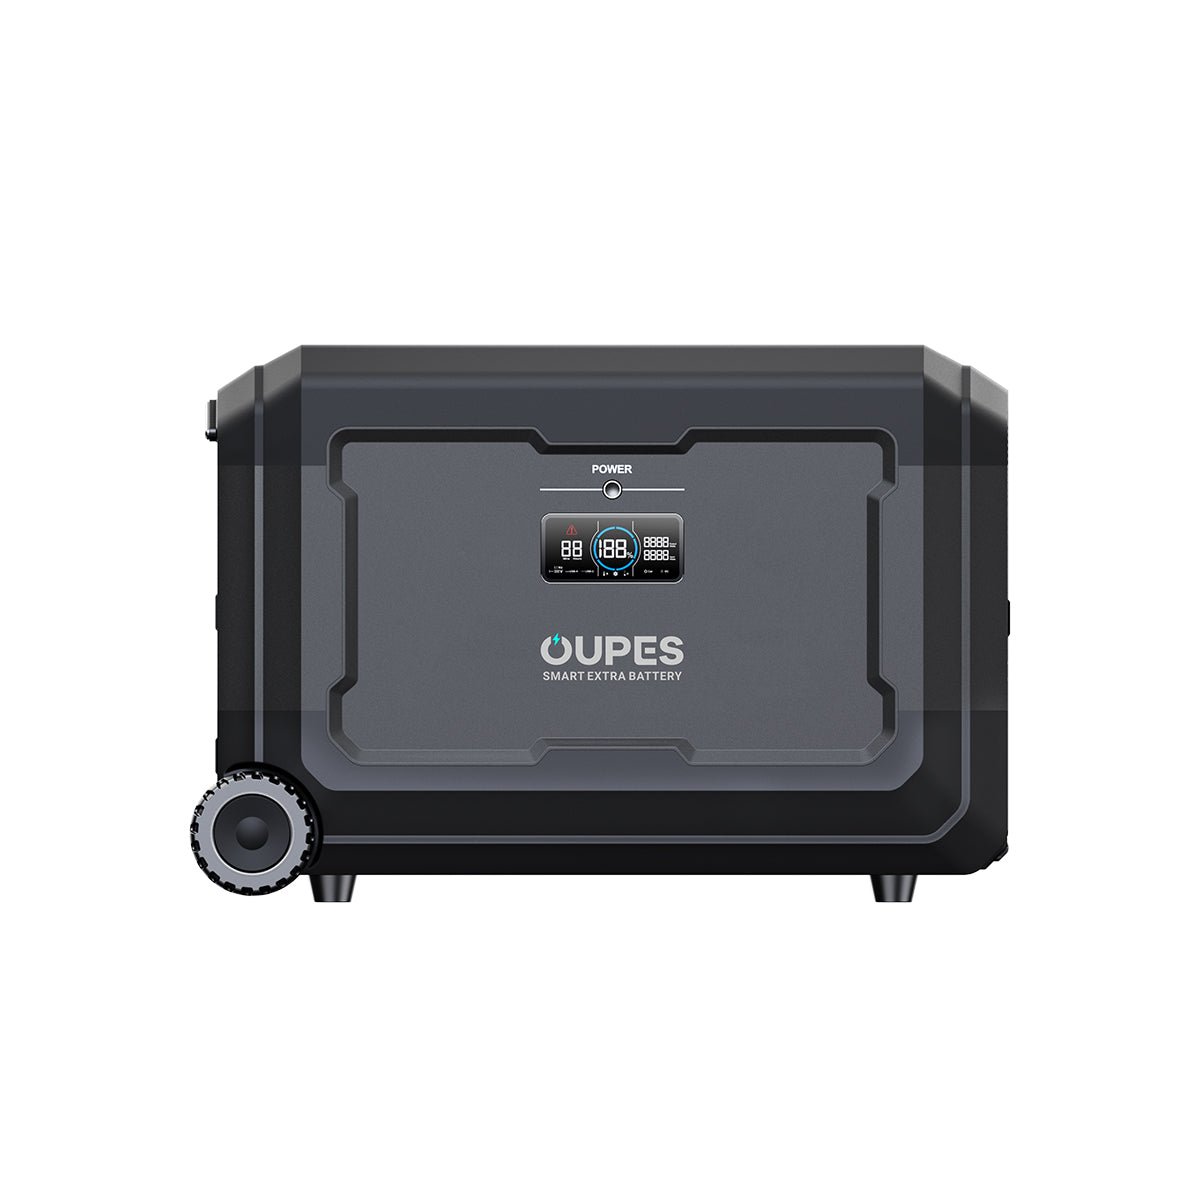 OUPES Mega 5 Home Backup & Portable Power Station | 4000W 5040Wh - OUPES